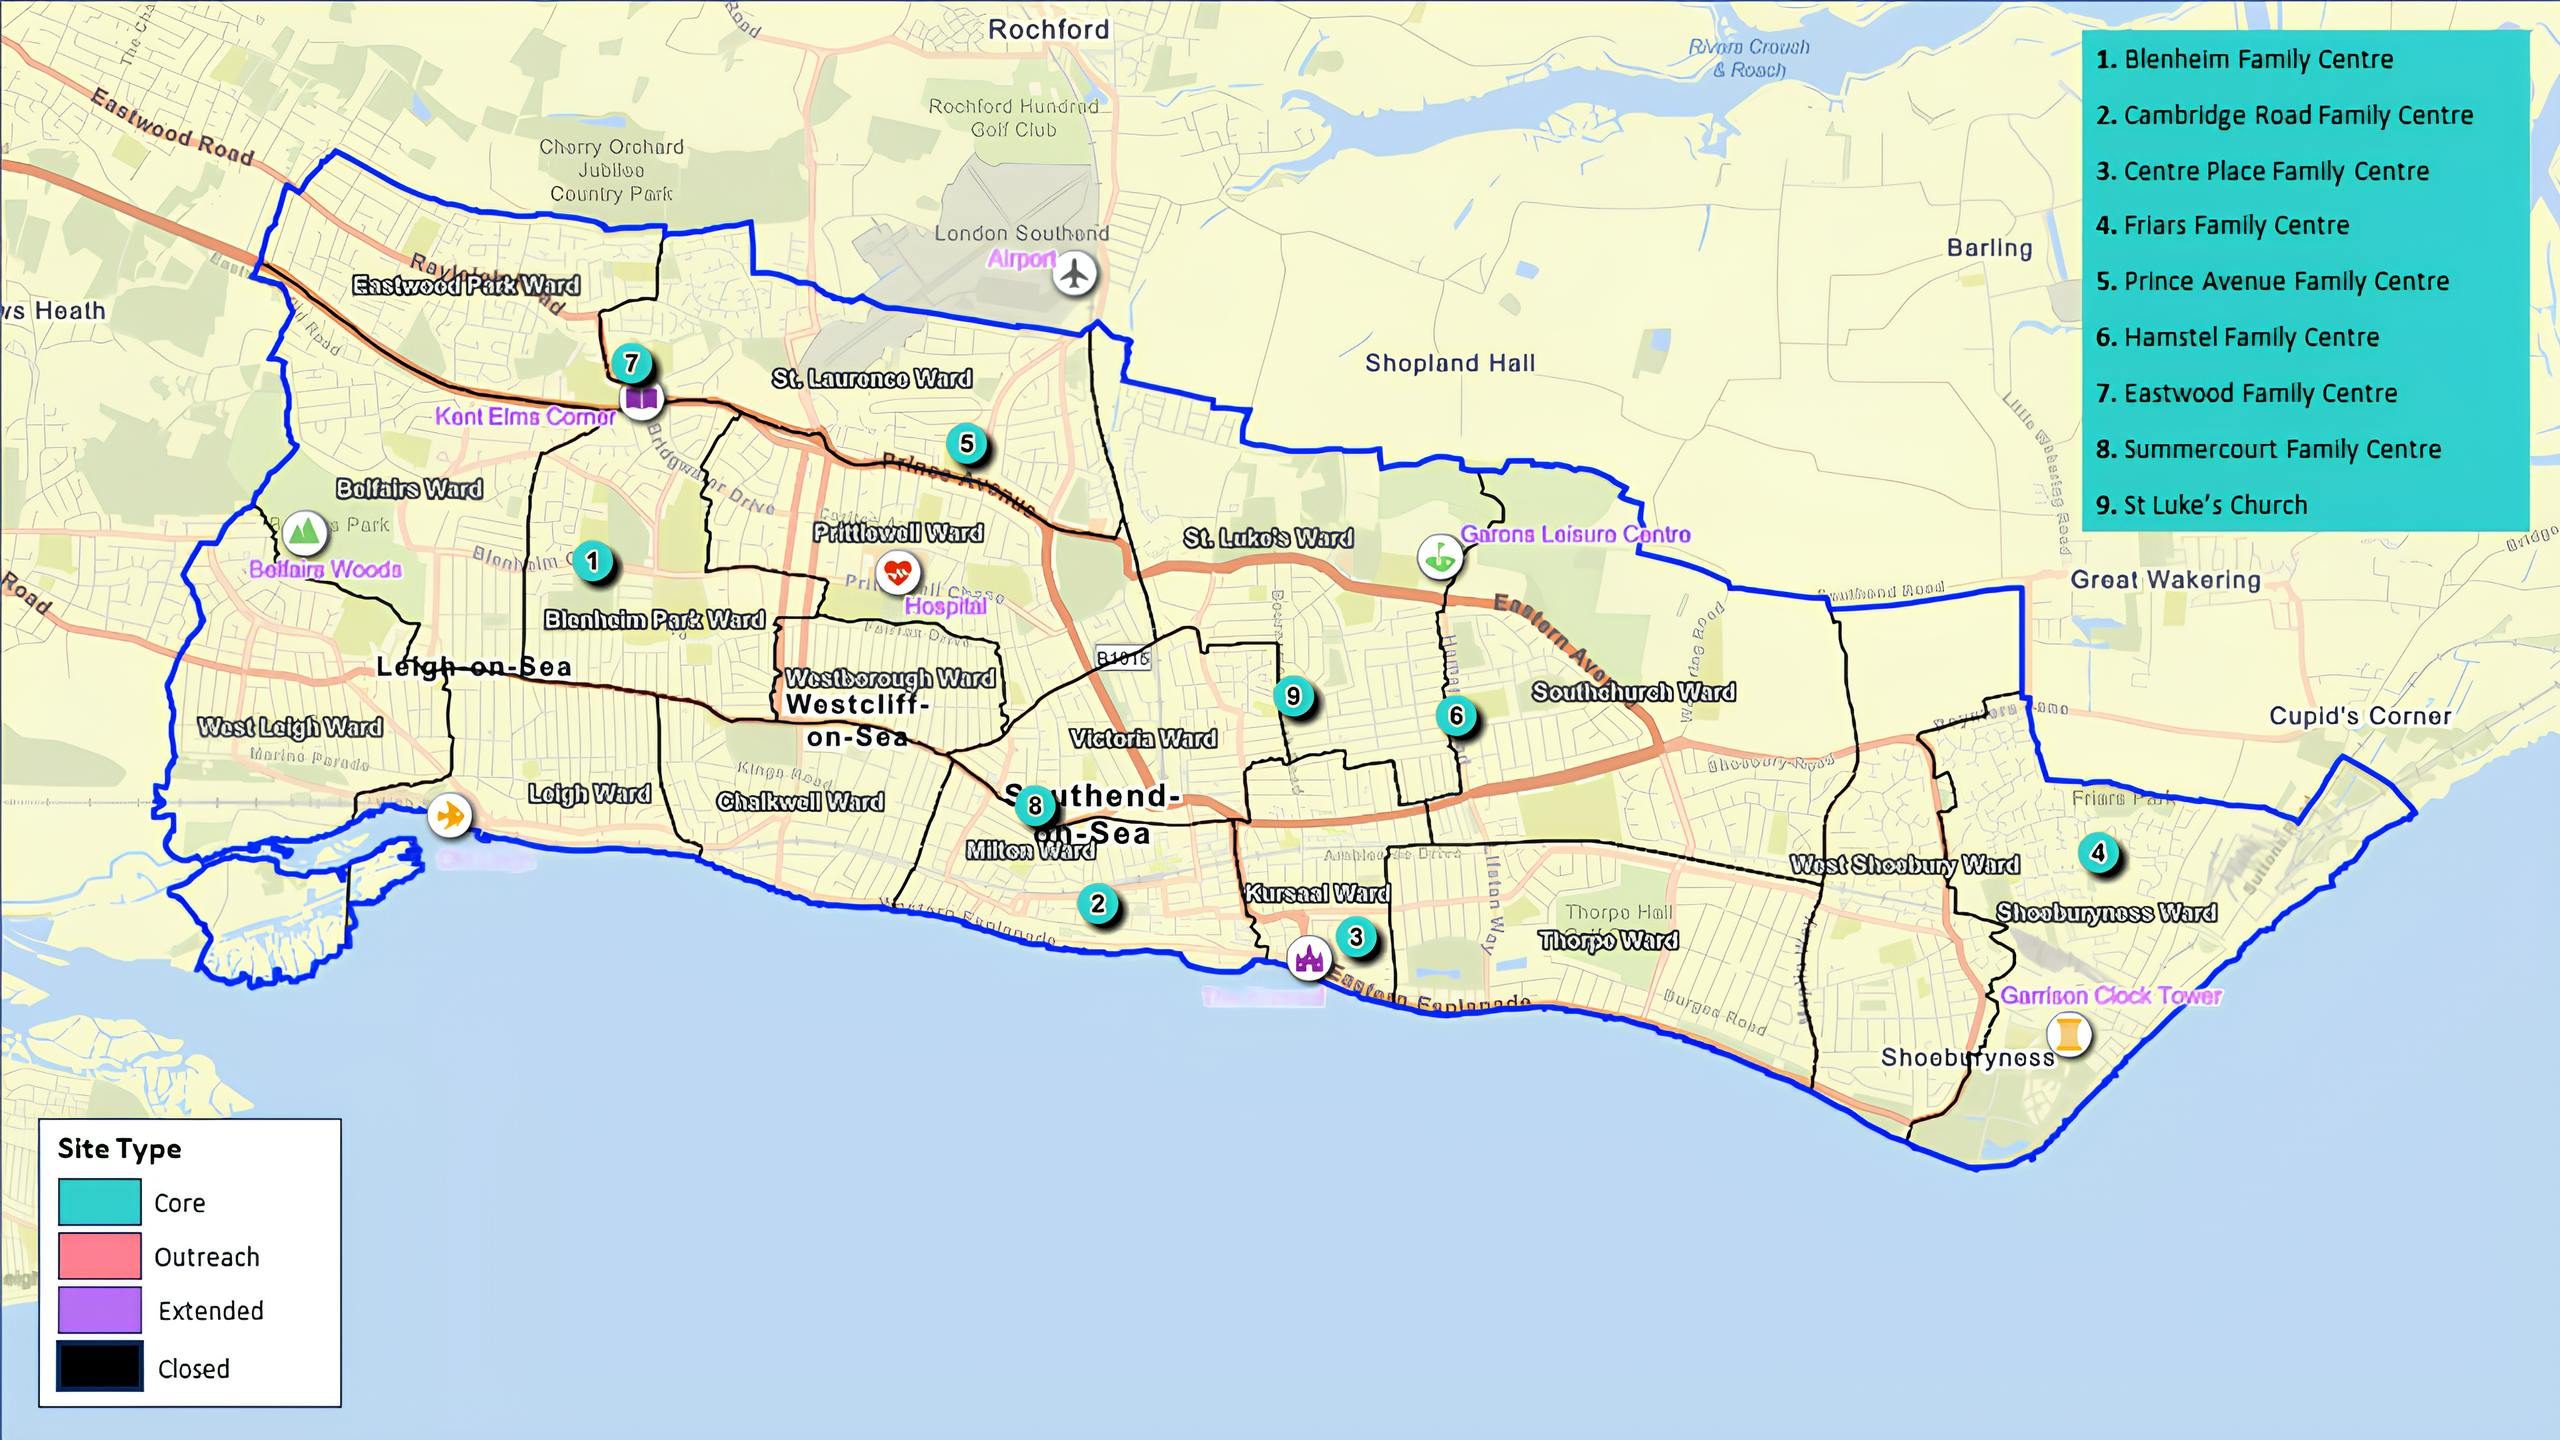 MAP 4 - 9 pins depicting the current sites for Family Centres in Option 3.png